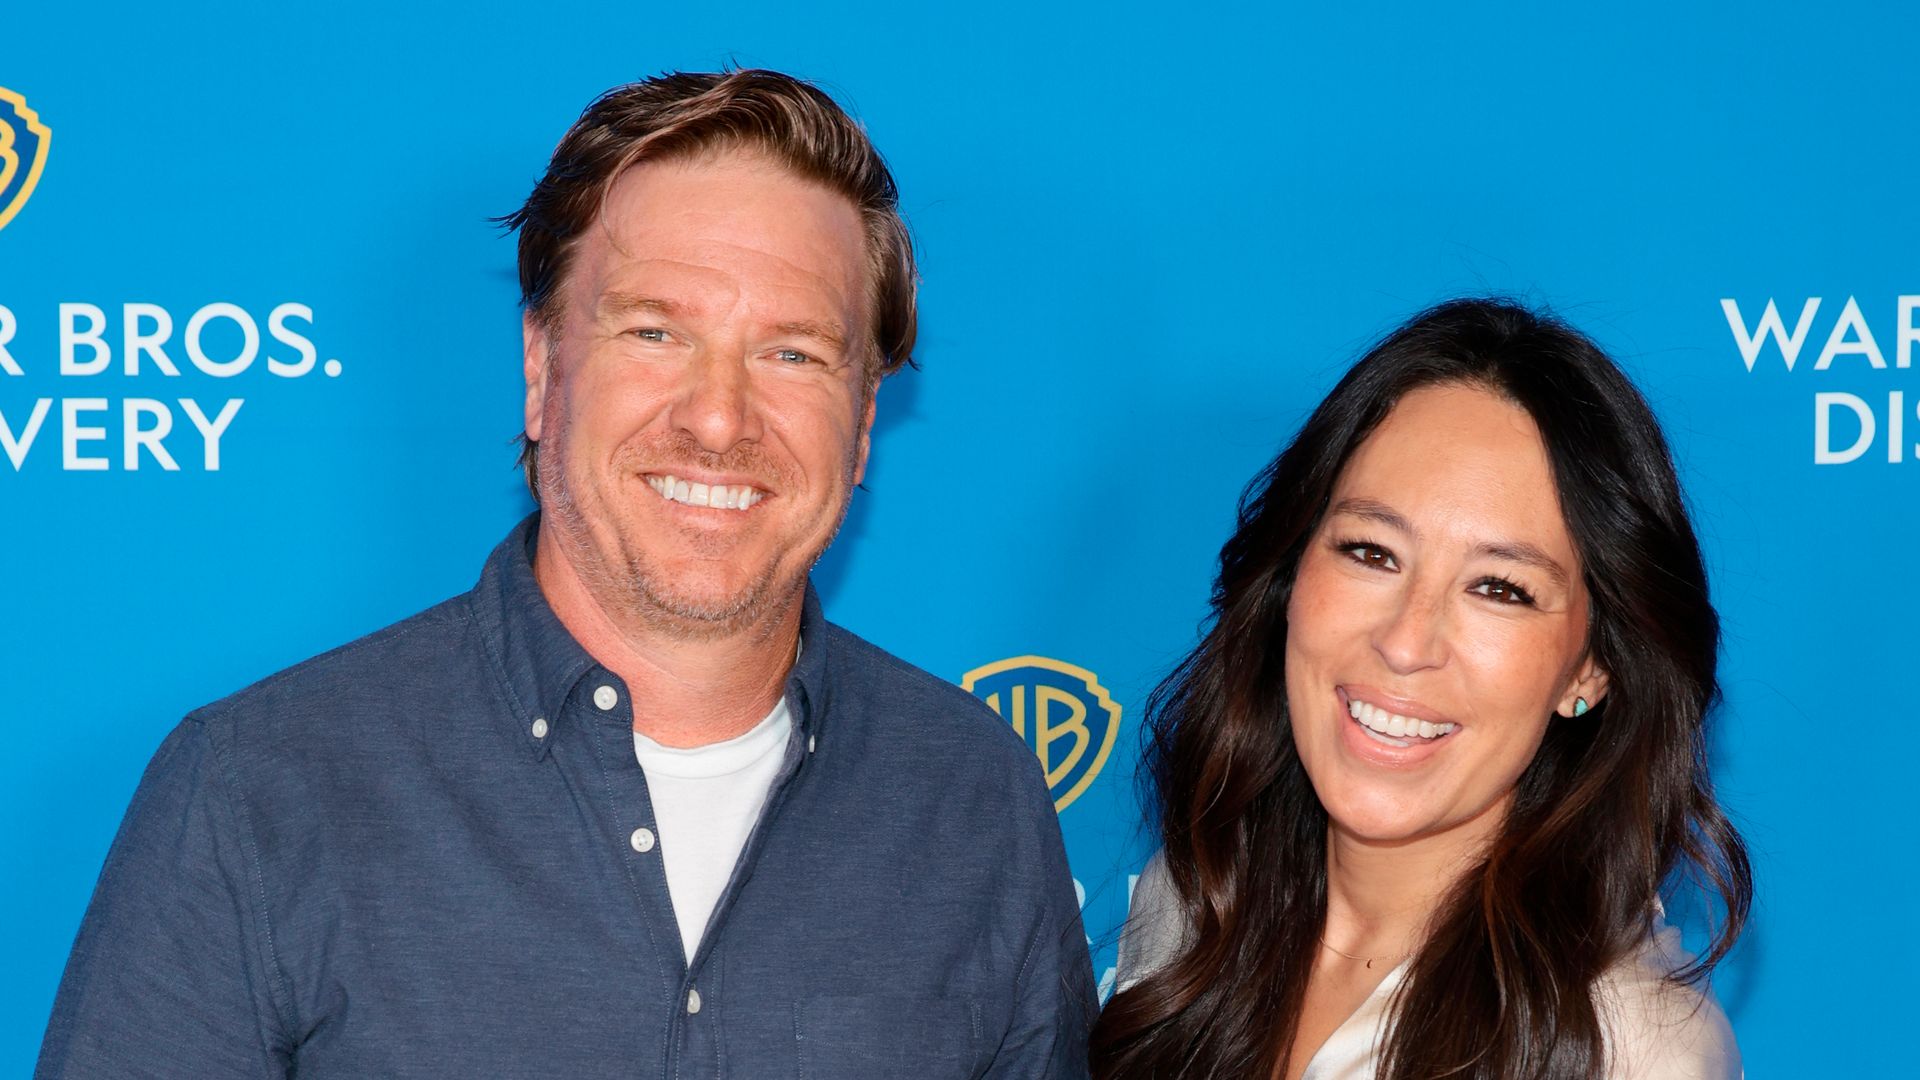 Chip Gaines, Fixer Upper on Magnolia and Joanna Gaines, Fixer Upper on Magnolia attend the Warner Bros. Discovery Upfront 2022 arrivals on the red carpet at MSG Studios on May 18, 2022 in New York City.